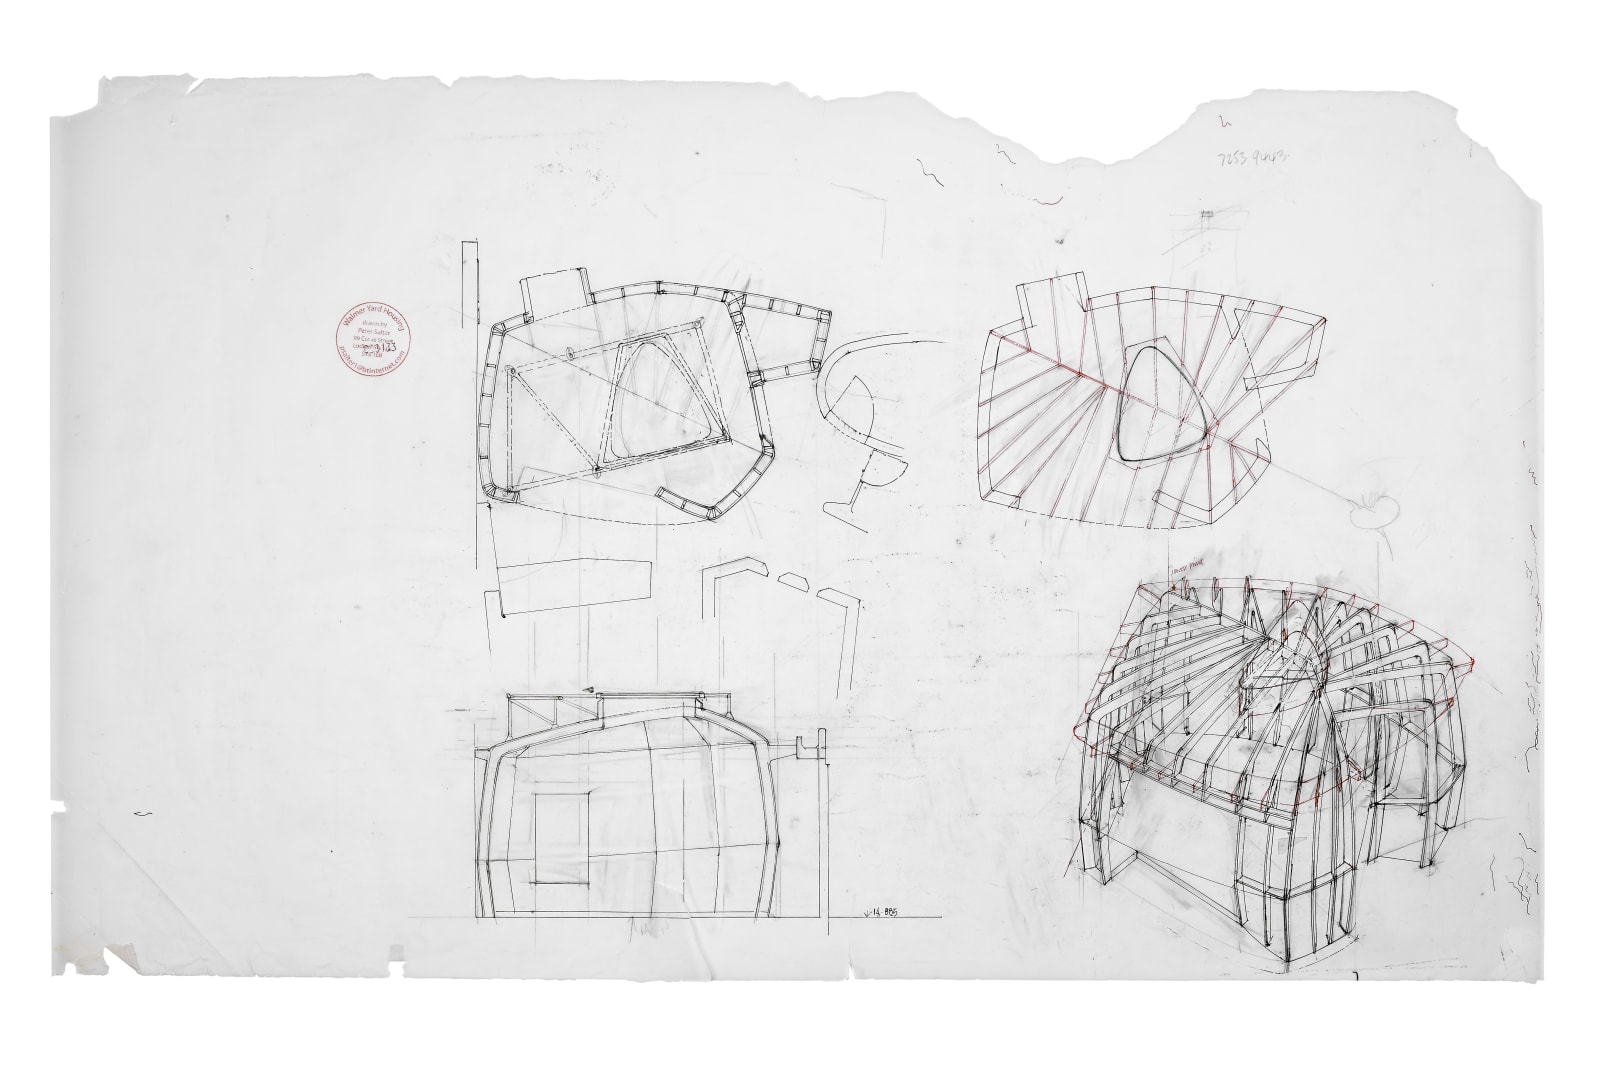 Peter Salter, Preliminary plan, section, axonometric of House 3 yurt structure (1:25), 2009